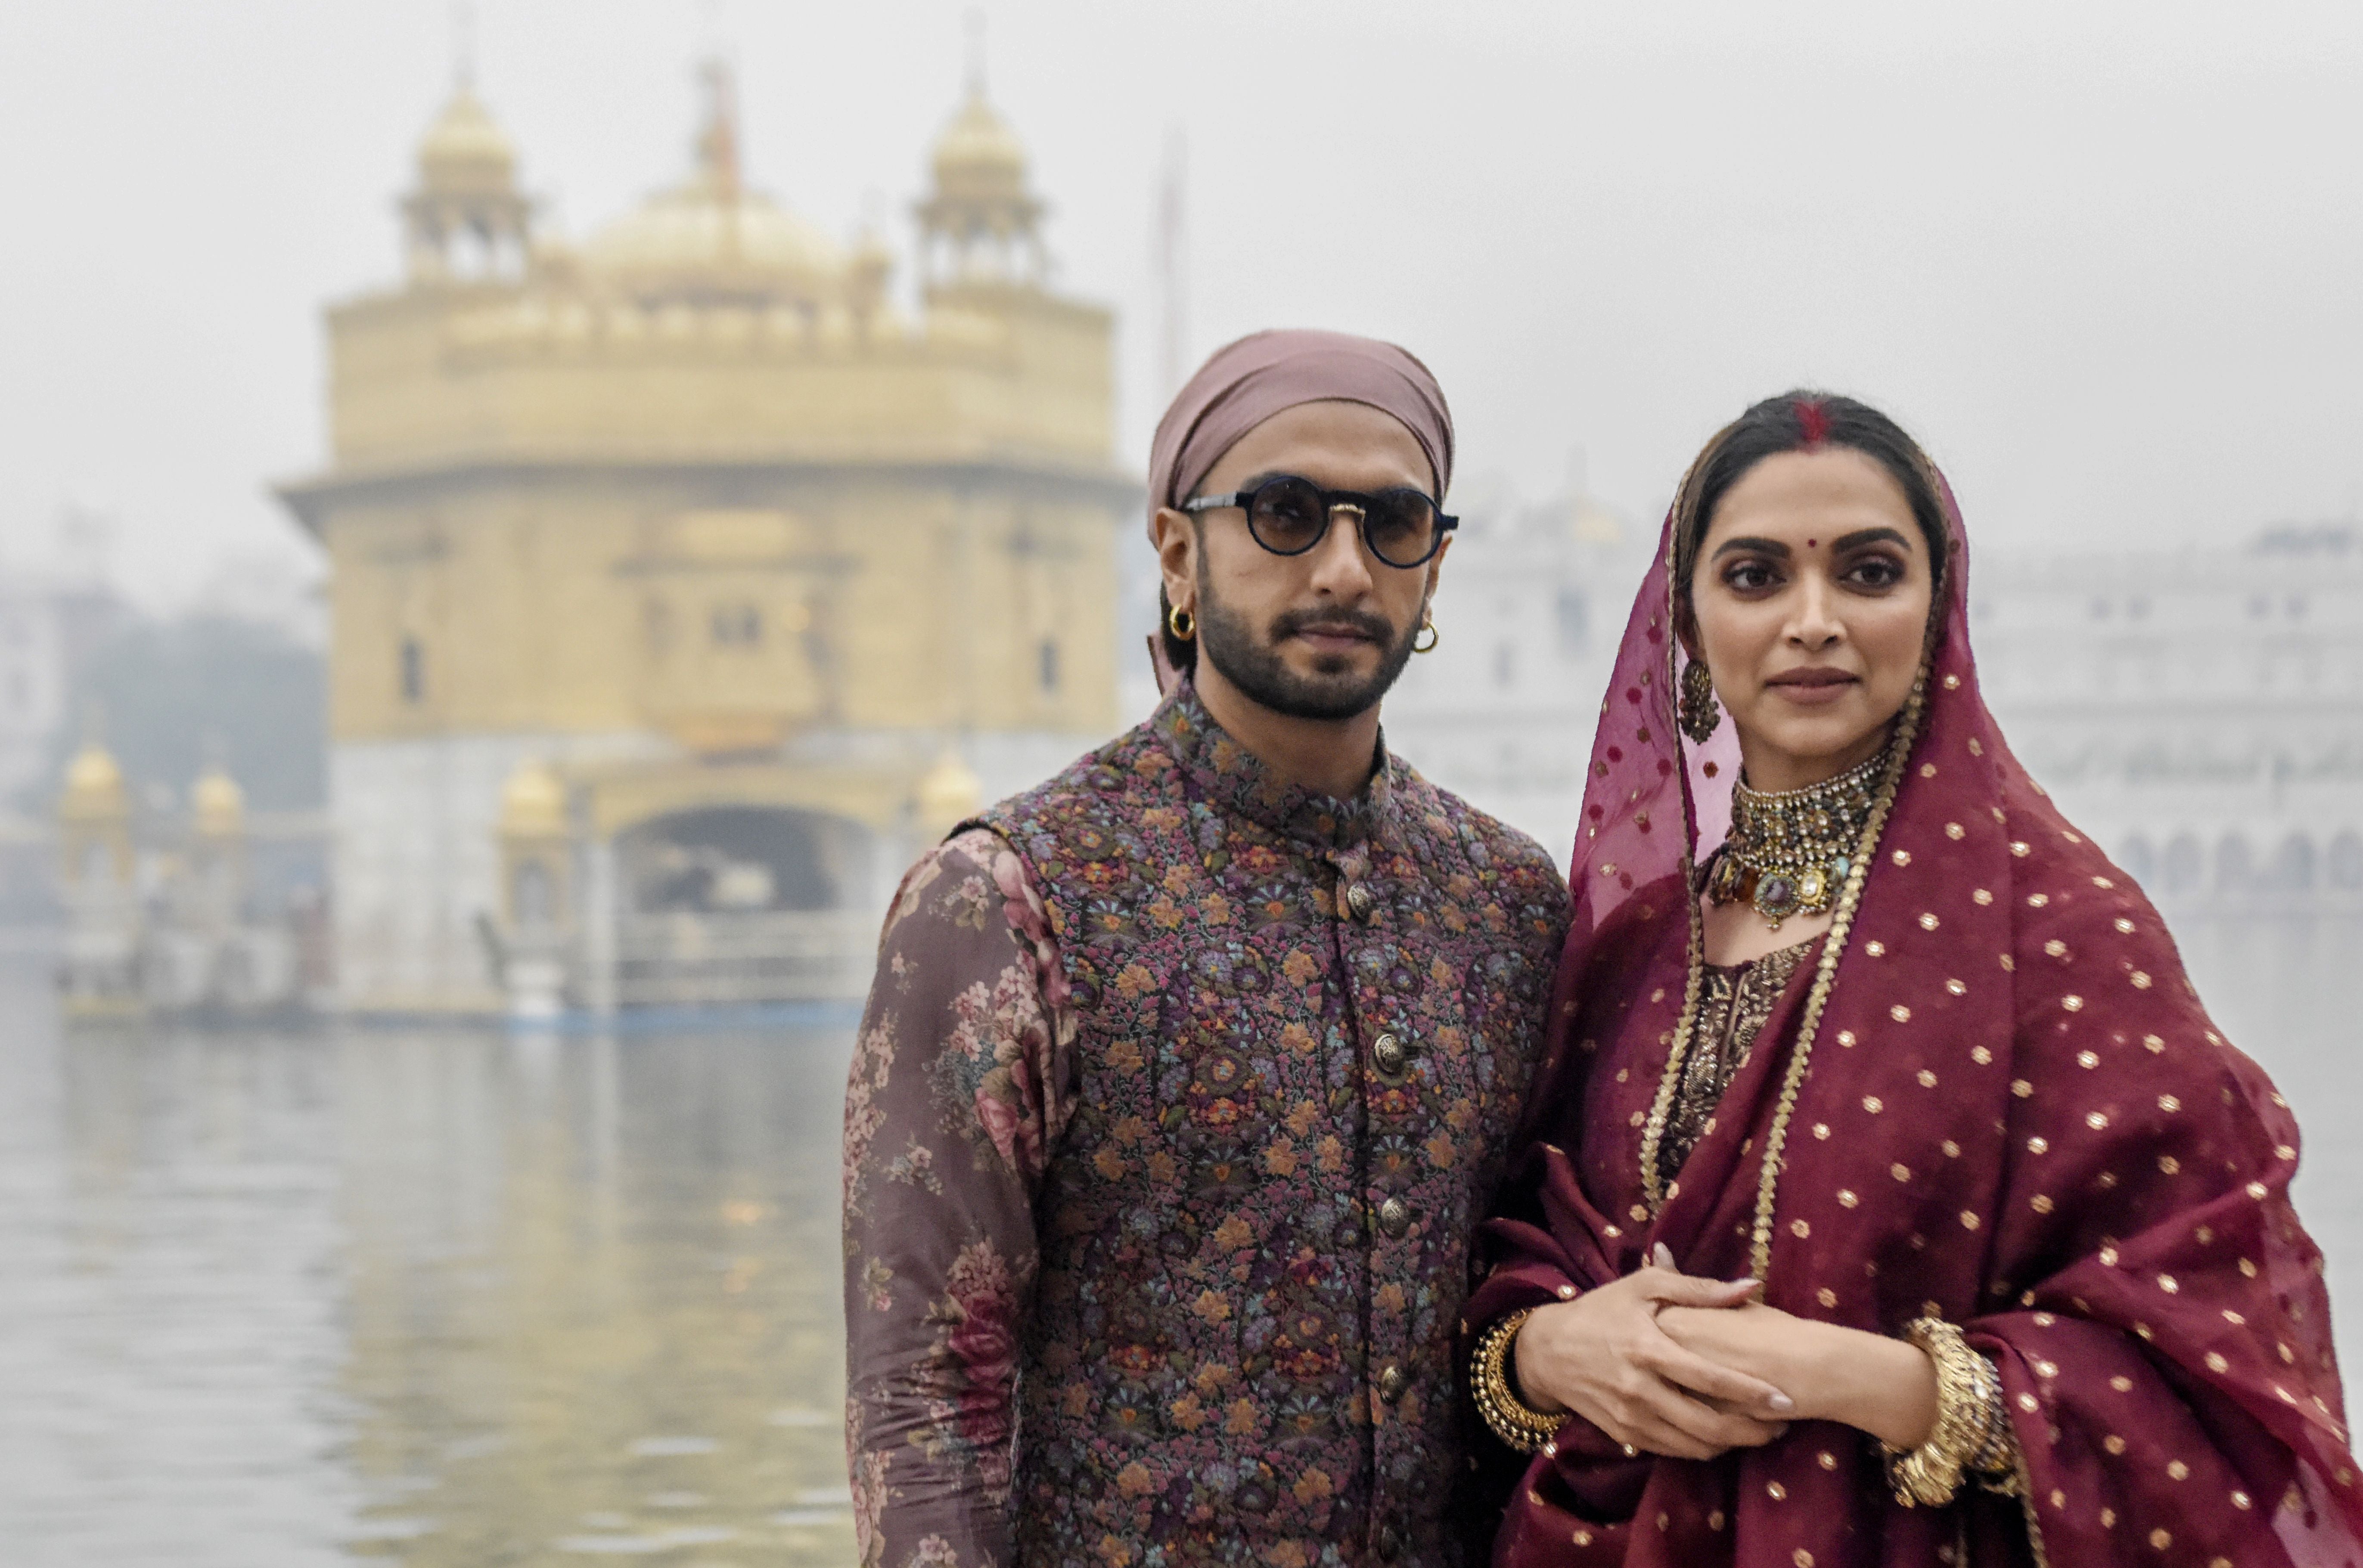 File image: Bollywood actors Ranveer Singh and Deepika Padukone at the Golden Temple in Amritsar